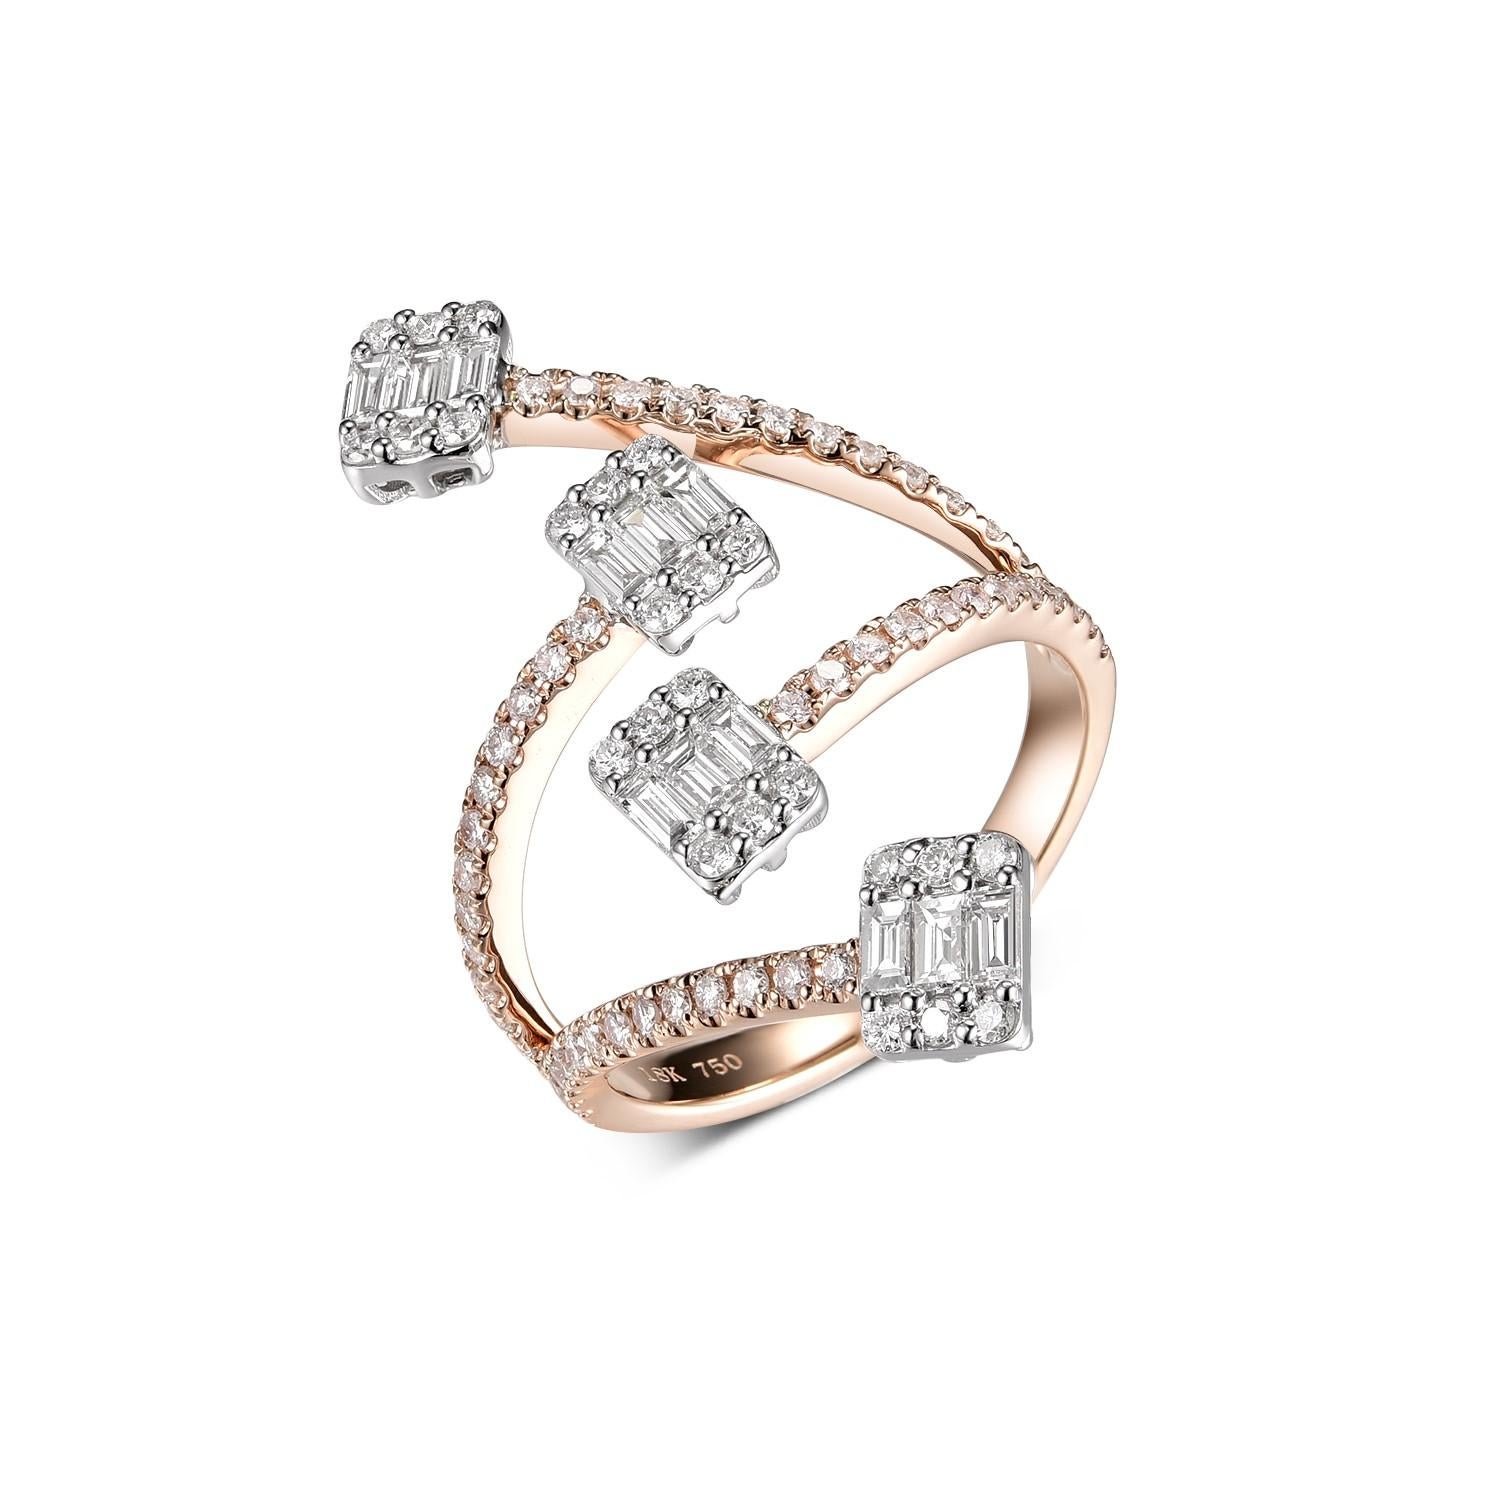 This diamond ring feature 0.43 carat of taper diamond and 0.57 carat of round diamonds. Ring is set in 18 karat rose and white gold. 

Taper Diamond 0.43 carat
Round Diamonds 0.57 carat
US 6.5
Resizing is available 